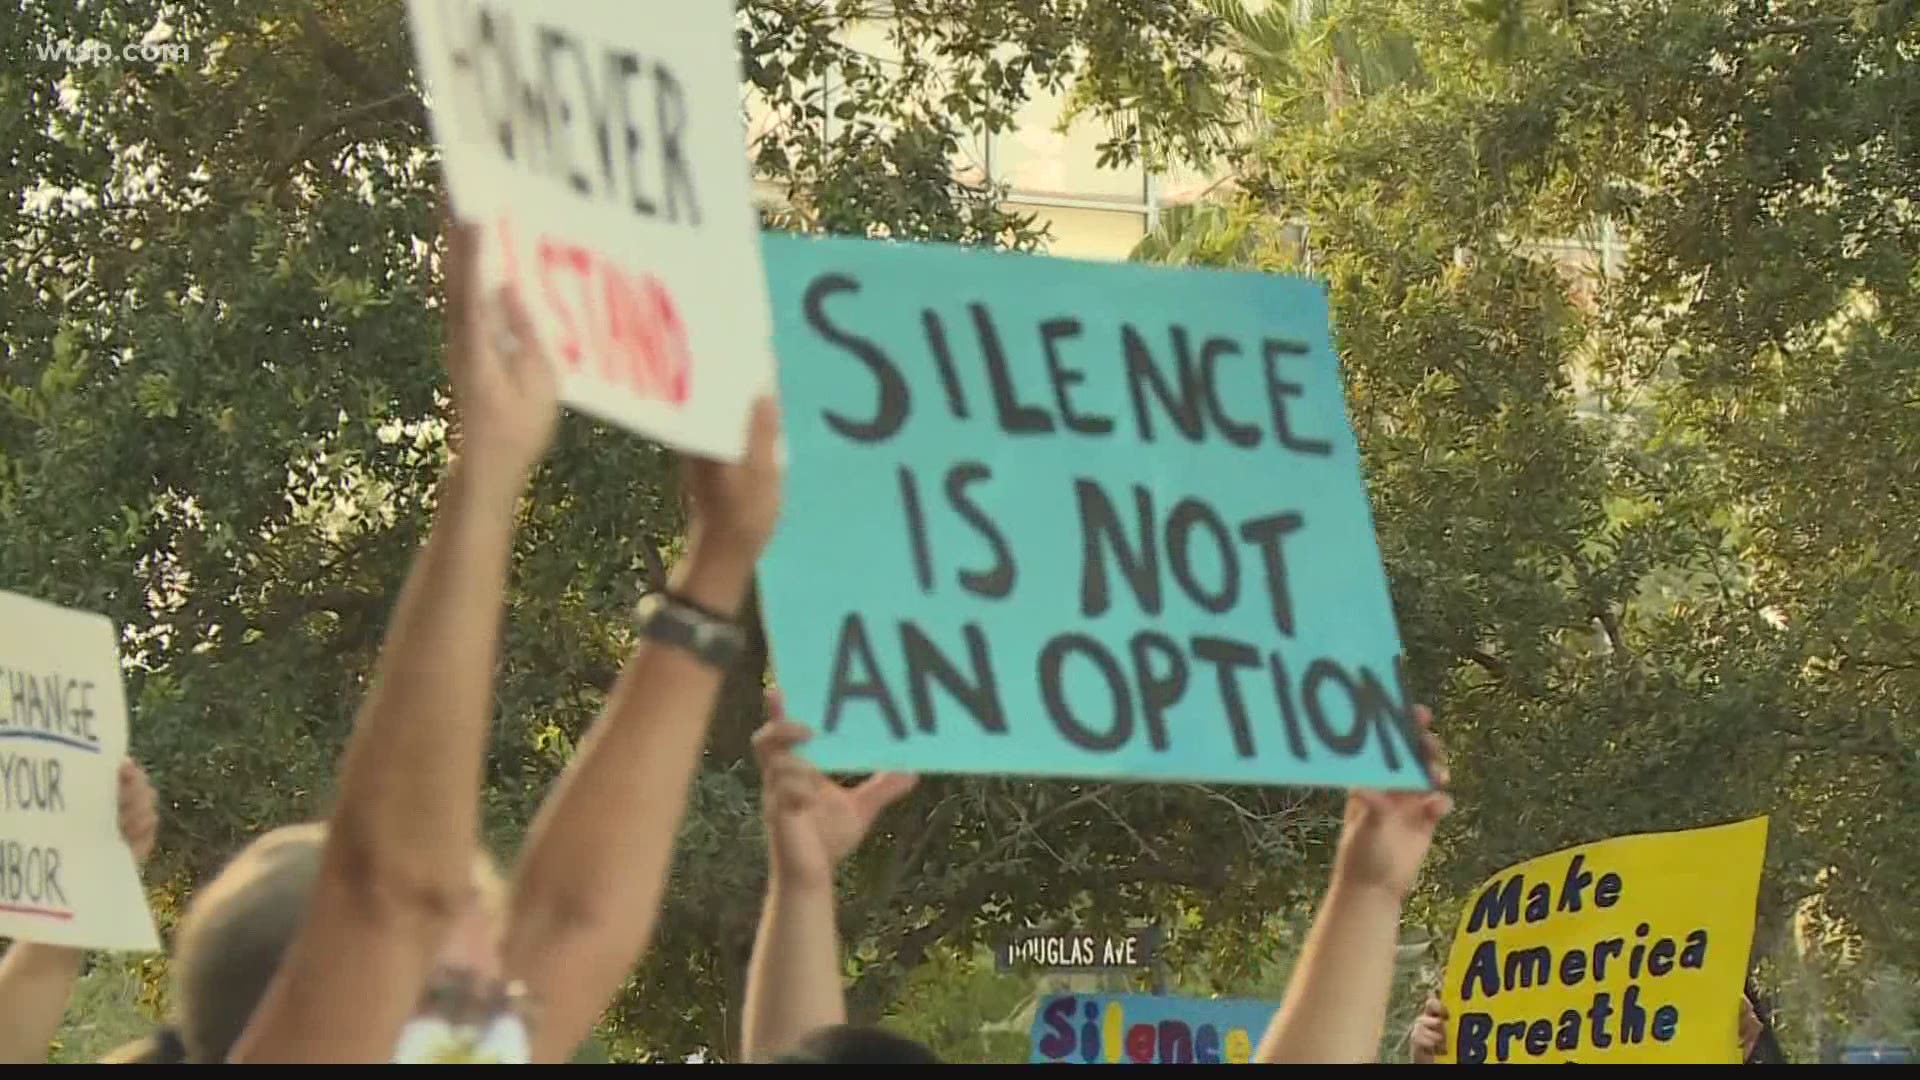 In Ybor City, the Tampa Bay Students for a Democratic Society organized a protest calling for, among other things, the creation of a police accountability council.